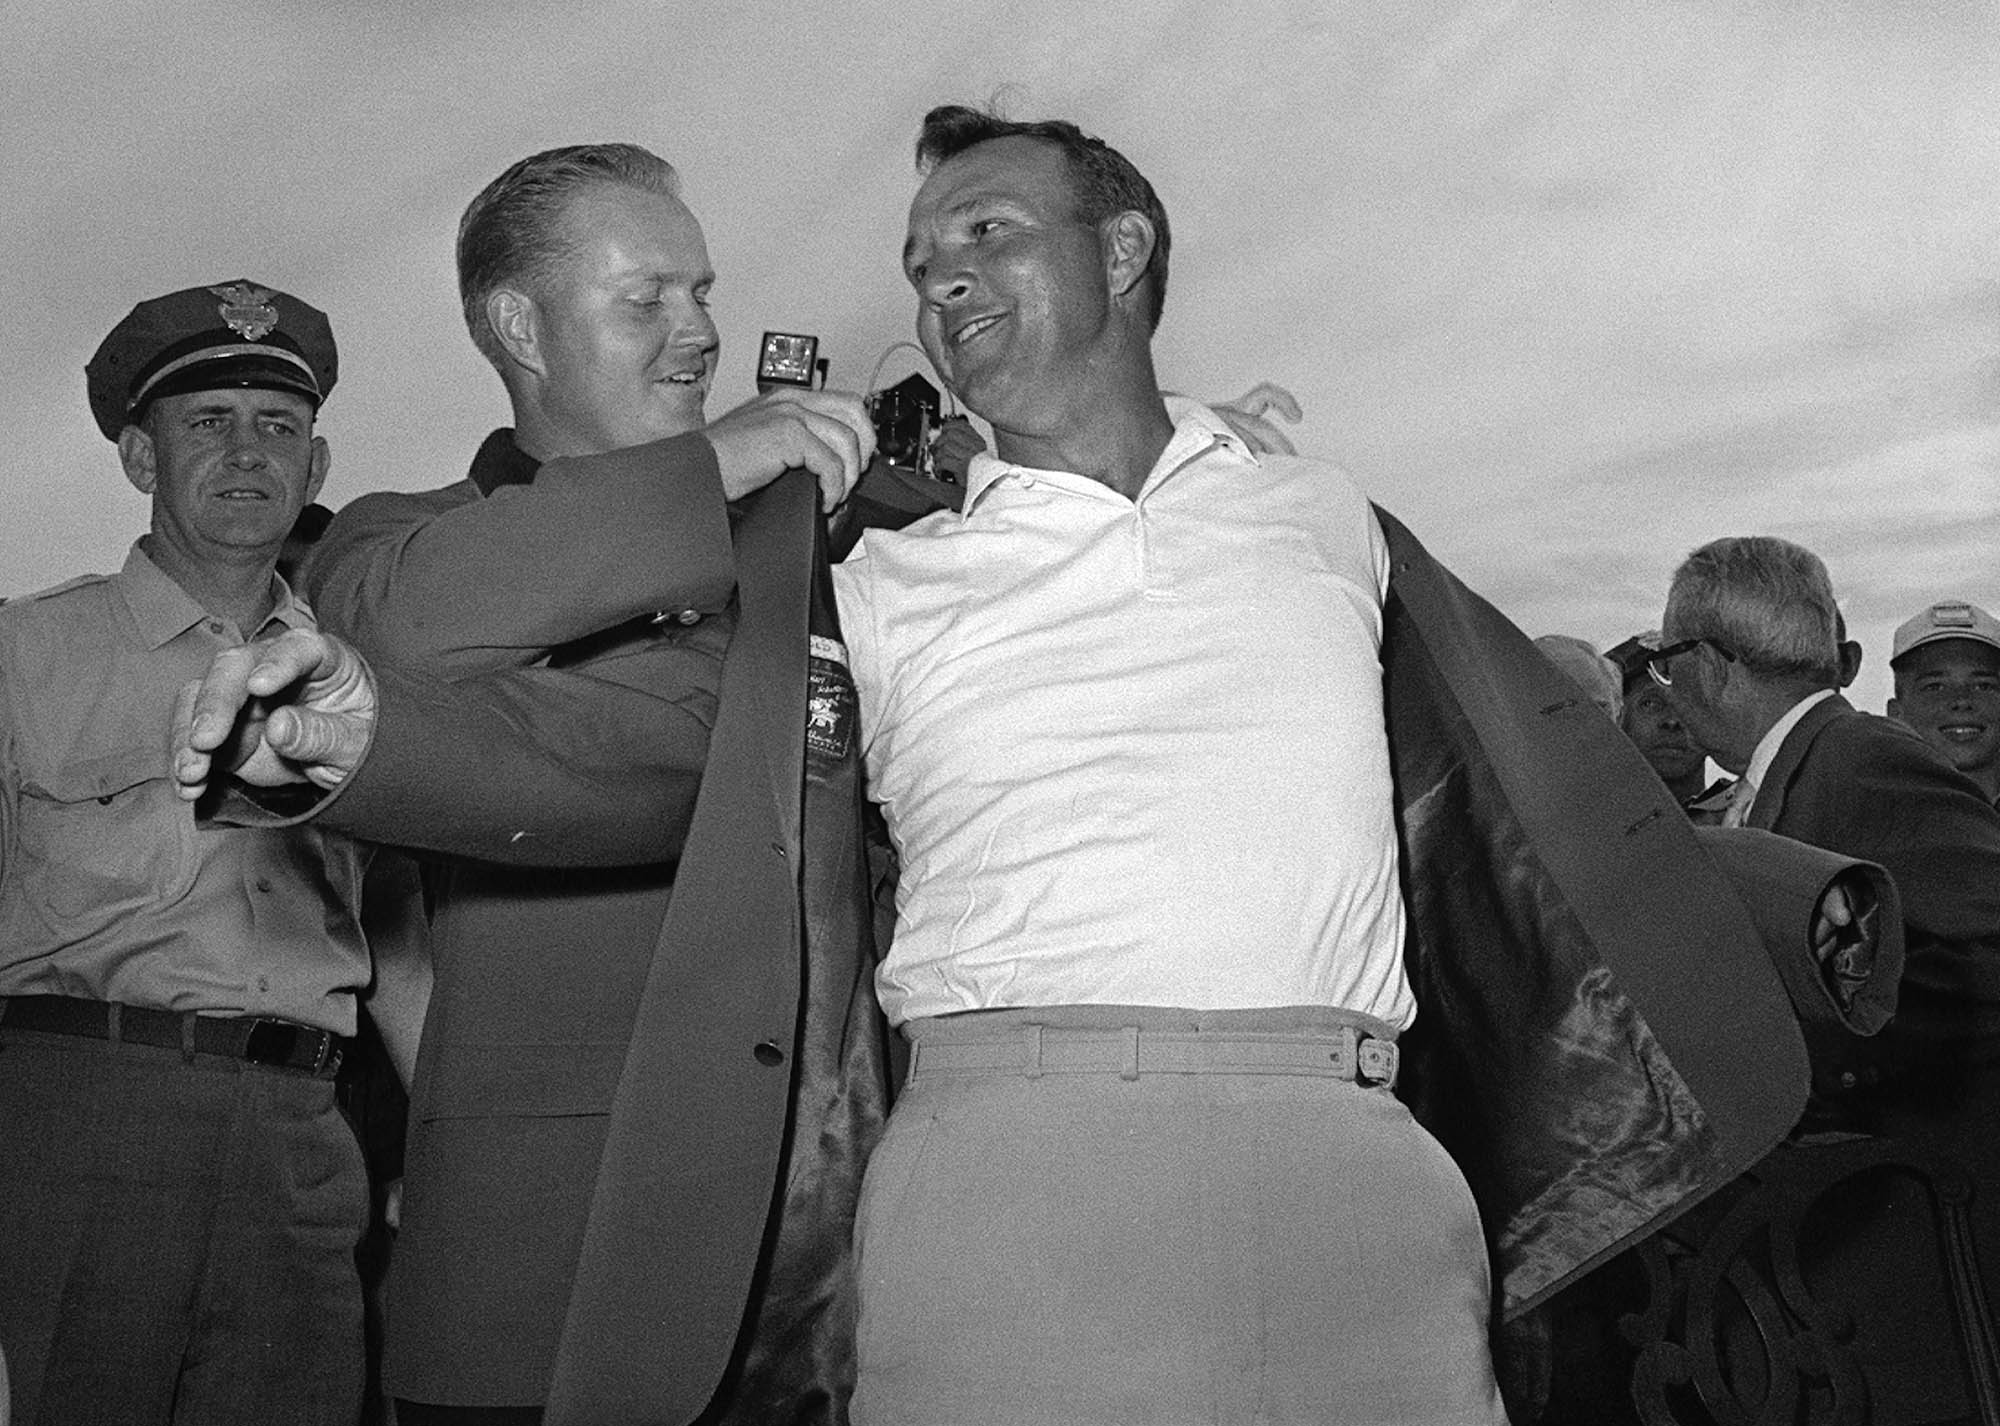 Arnold Palmer, right, slips into his green jacket with help from Jack Nicklaus after winning the Masters golf championship, in Augusta, Ga, April 12, 1964.